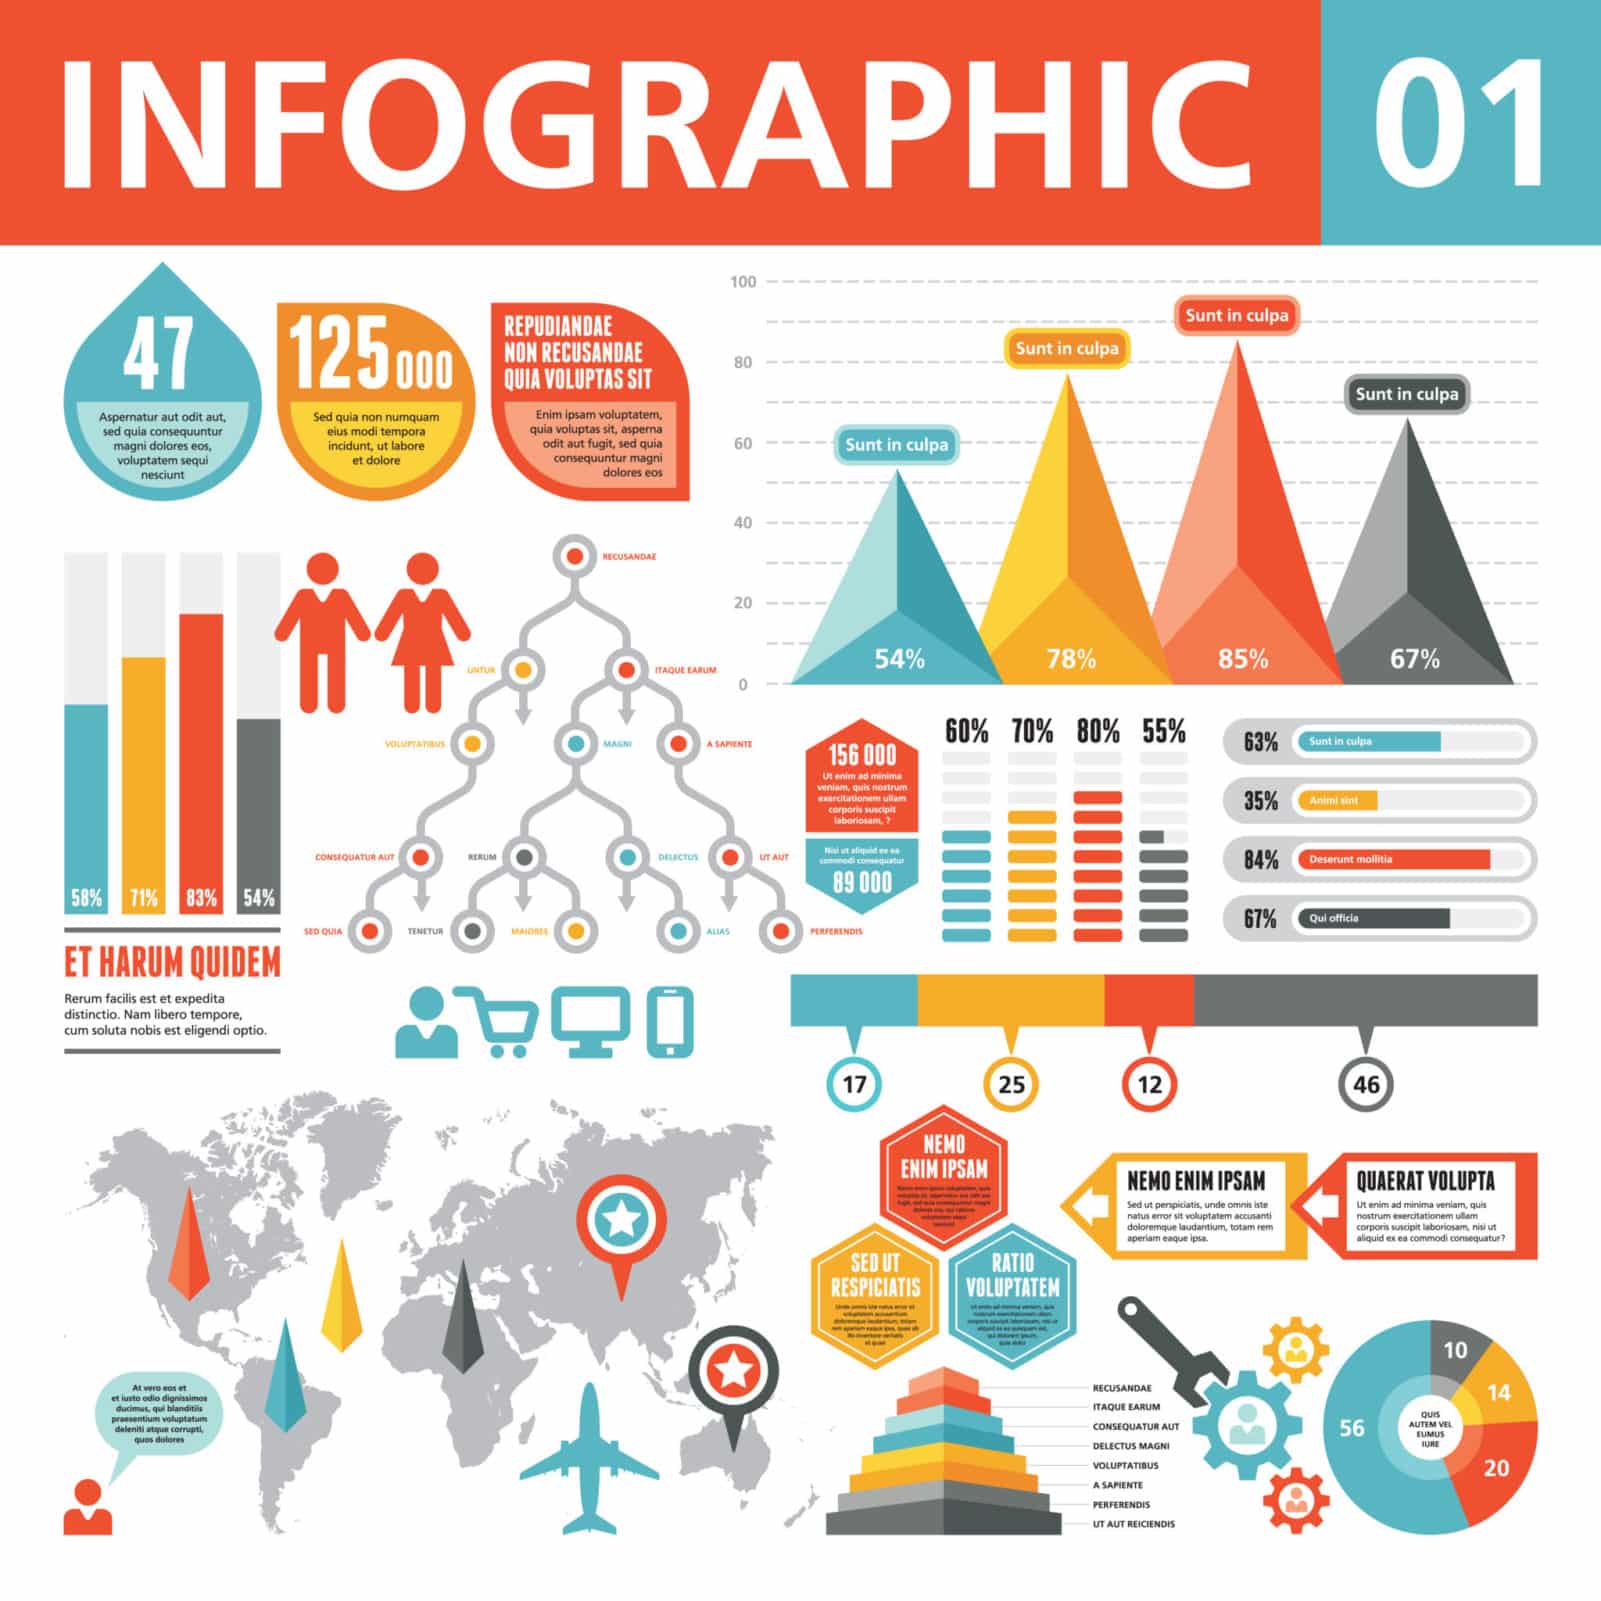 5 Amazing Facts about Corporate eLearning Infographic - e-Learning Infographics